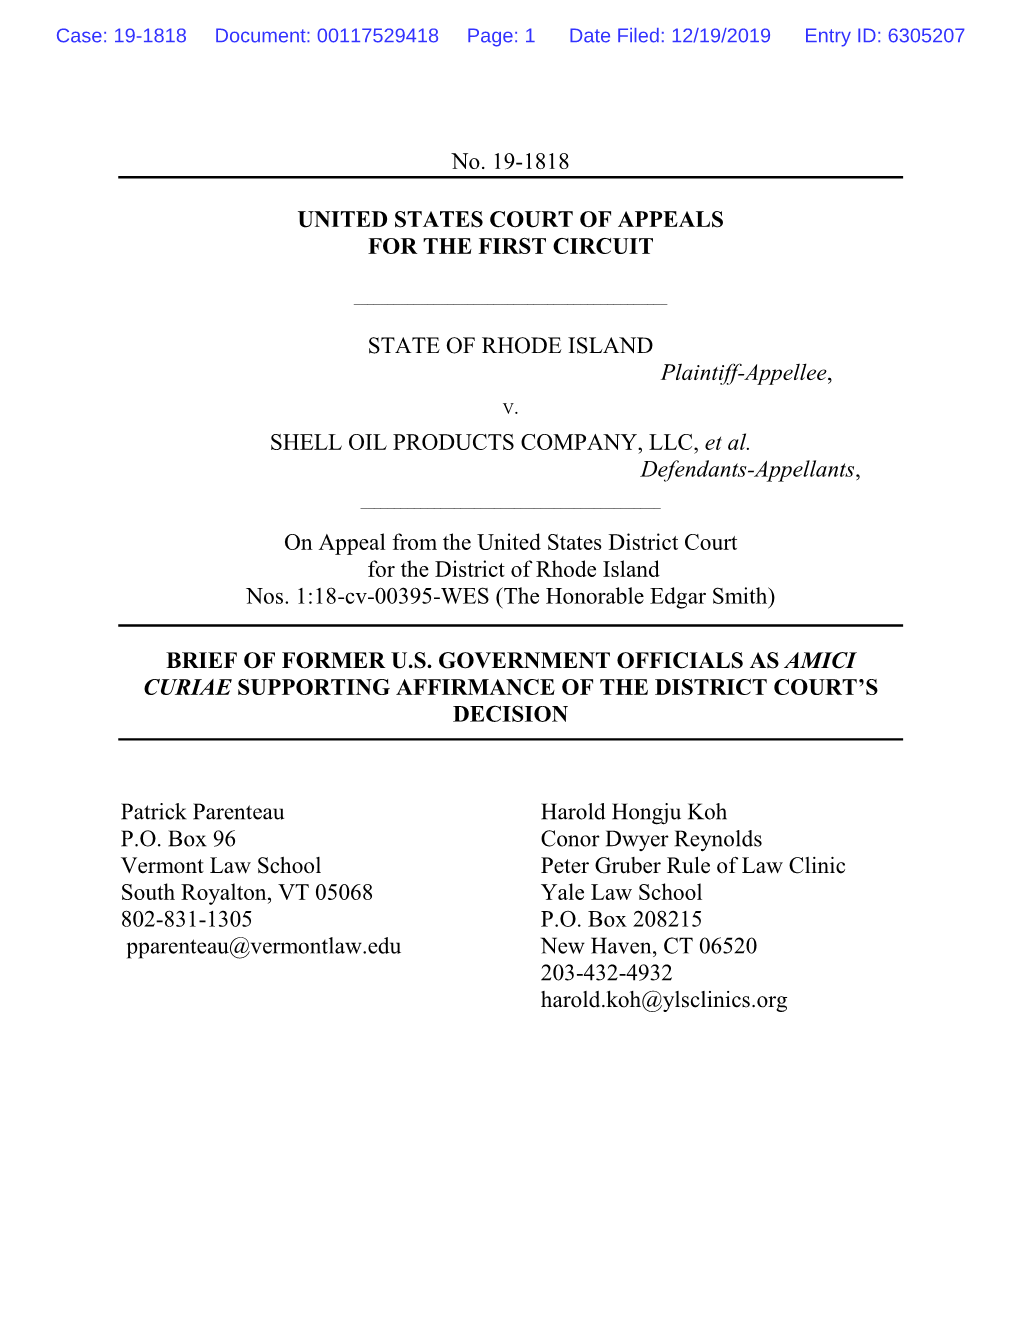 No. 19-1818 UNITED STATES COURT of APPEALS for THE